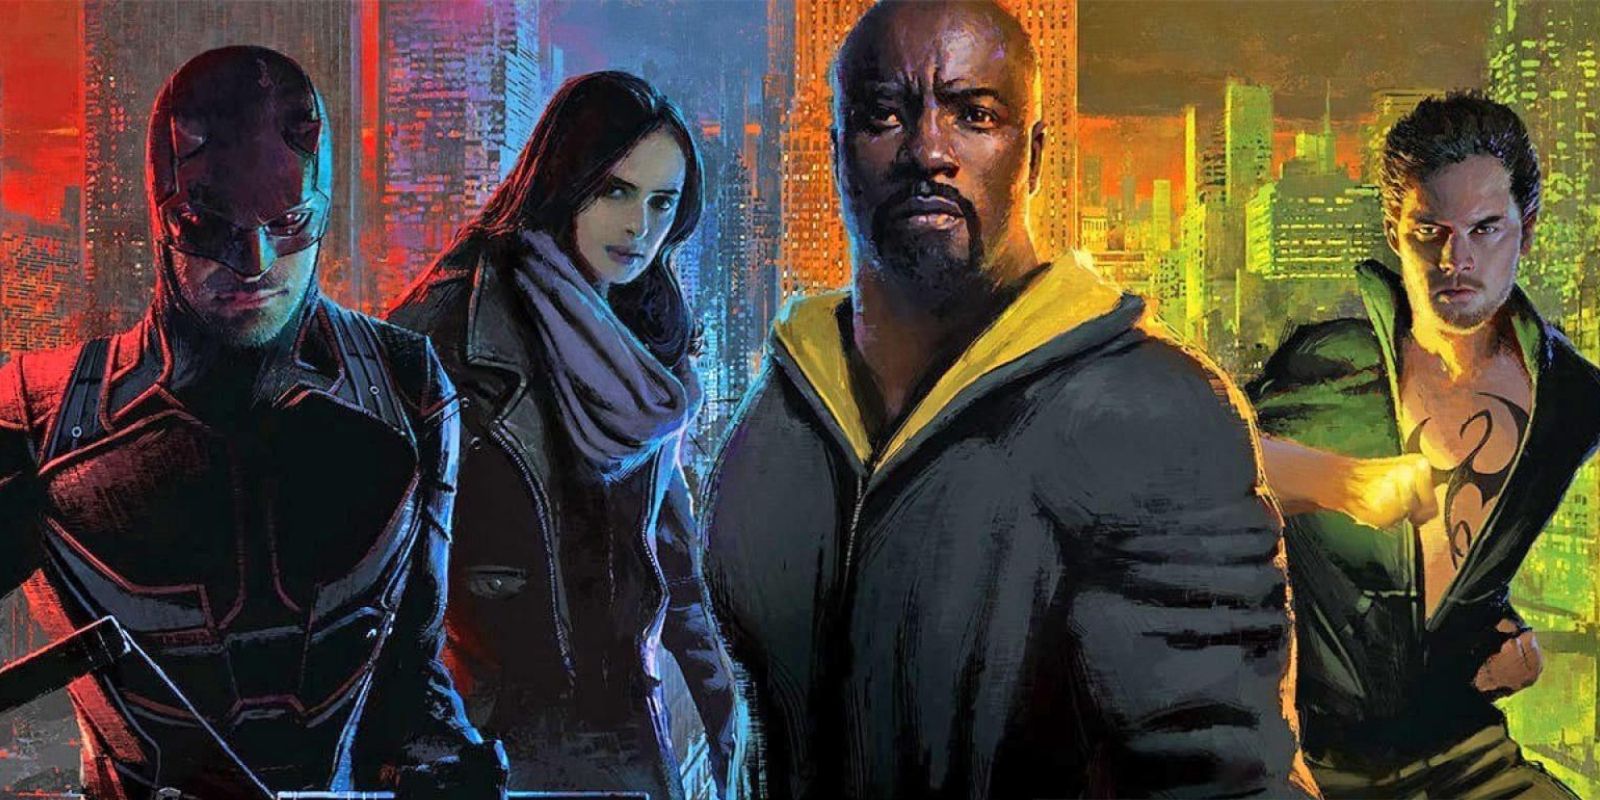 Daredevil, Jessica Jones, Luke Cage, Iron Fist in Netflix's The Defenders from Marvel Television